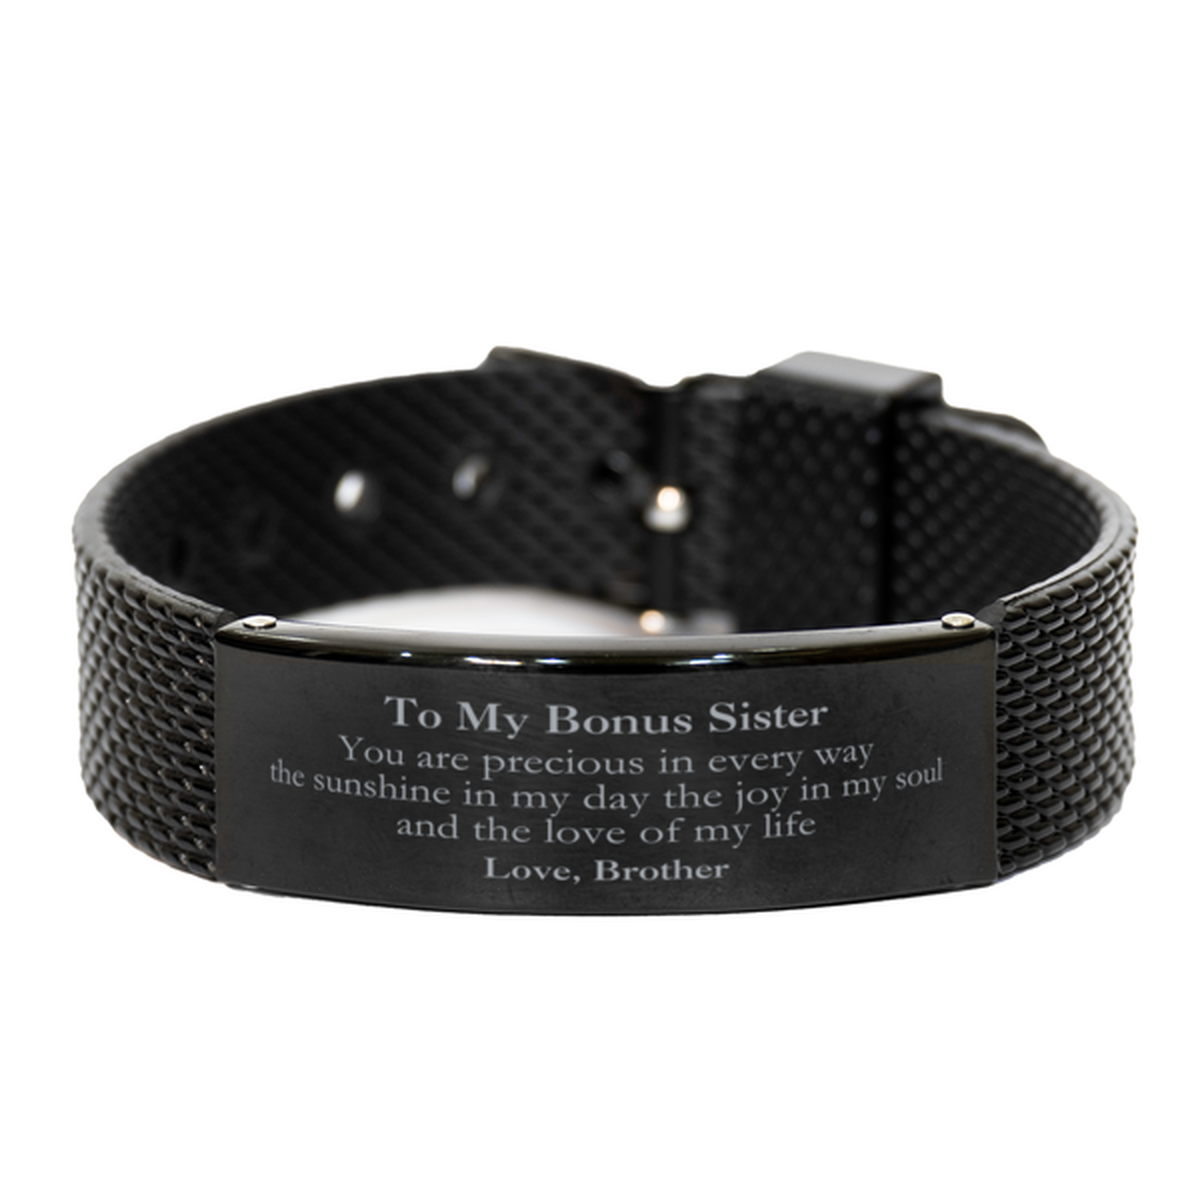 Graduation Gifts for Bonus Sister Black Shark Mesh Bracelet Present from Brother, Christmas Bonus Sister Birthday Gifts Bonus Sister You are precious in every way the sunshine in my day. Love, Brother